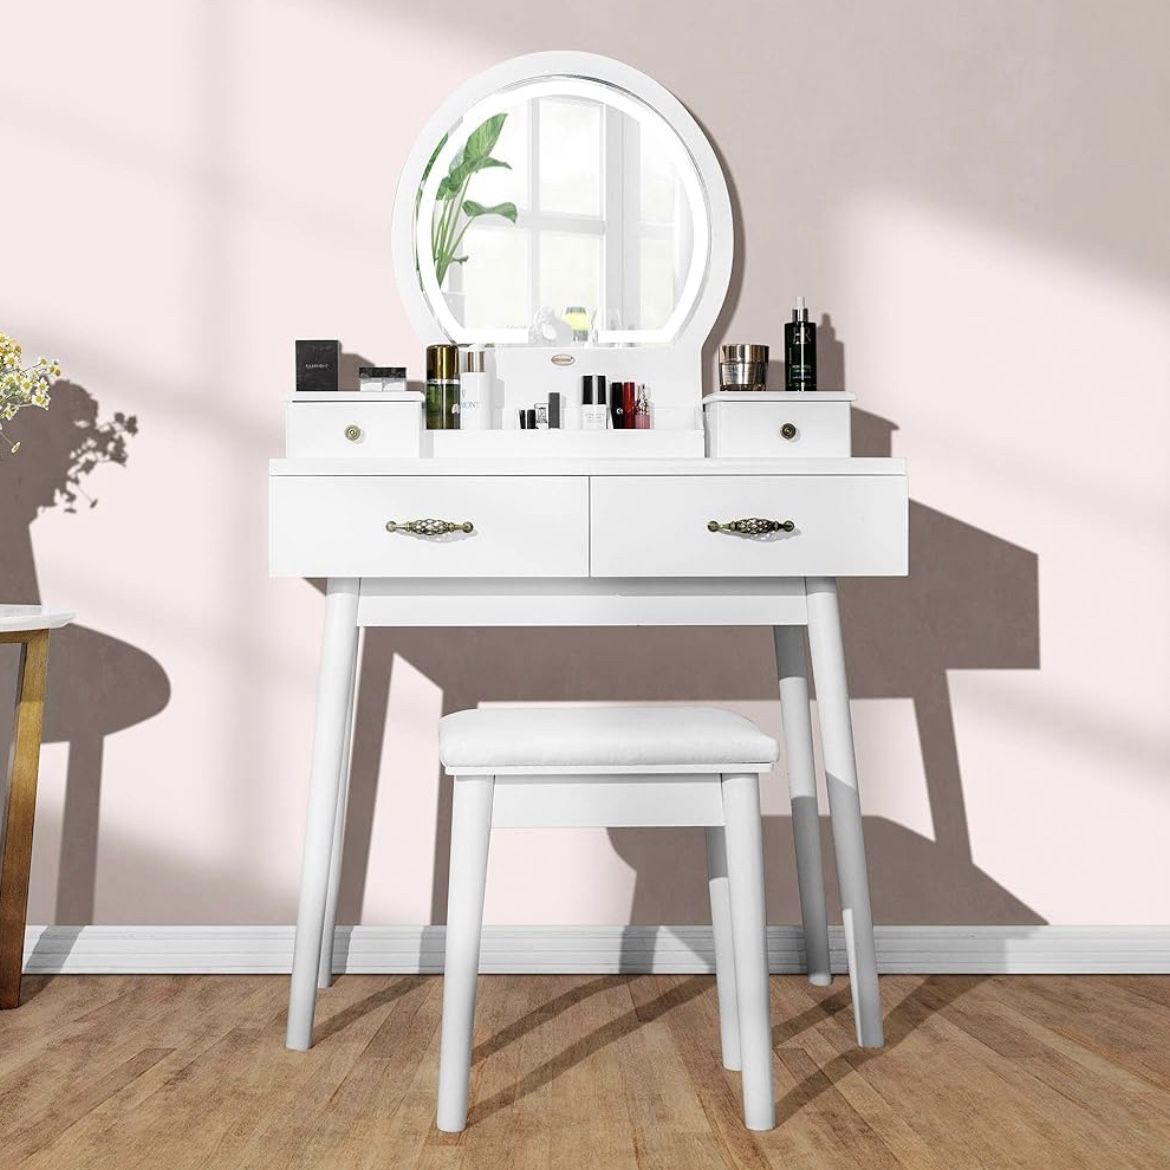 29-92 VIVOHOME Vanity Set with 3-Color Dimmable Lighted Mirror, Makeup Dressing Table with Drawers, Padded Stool, White